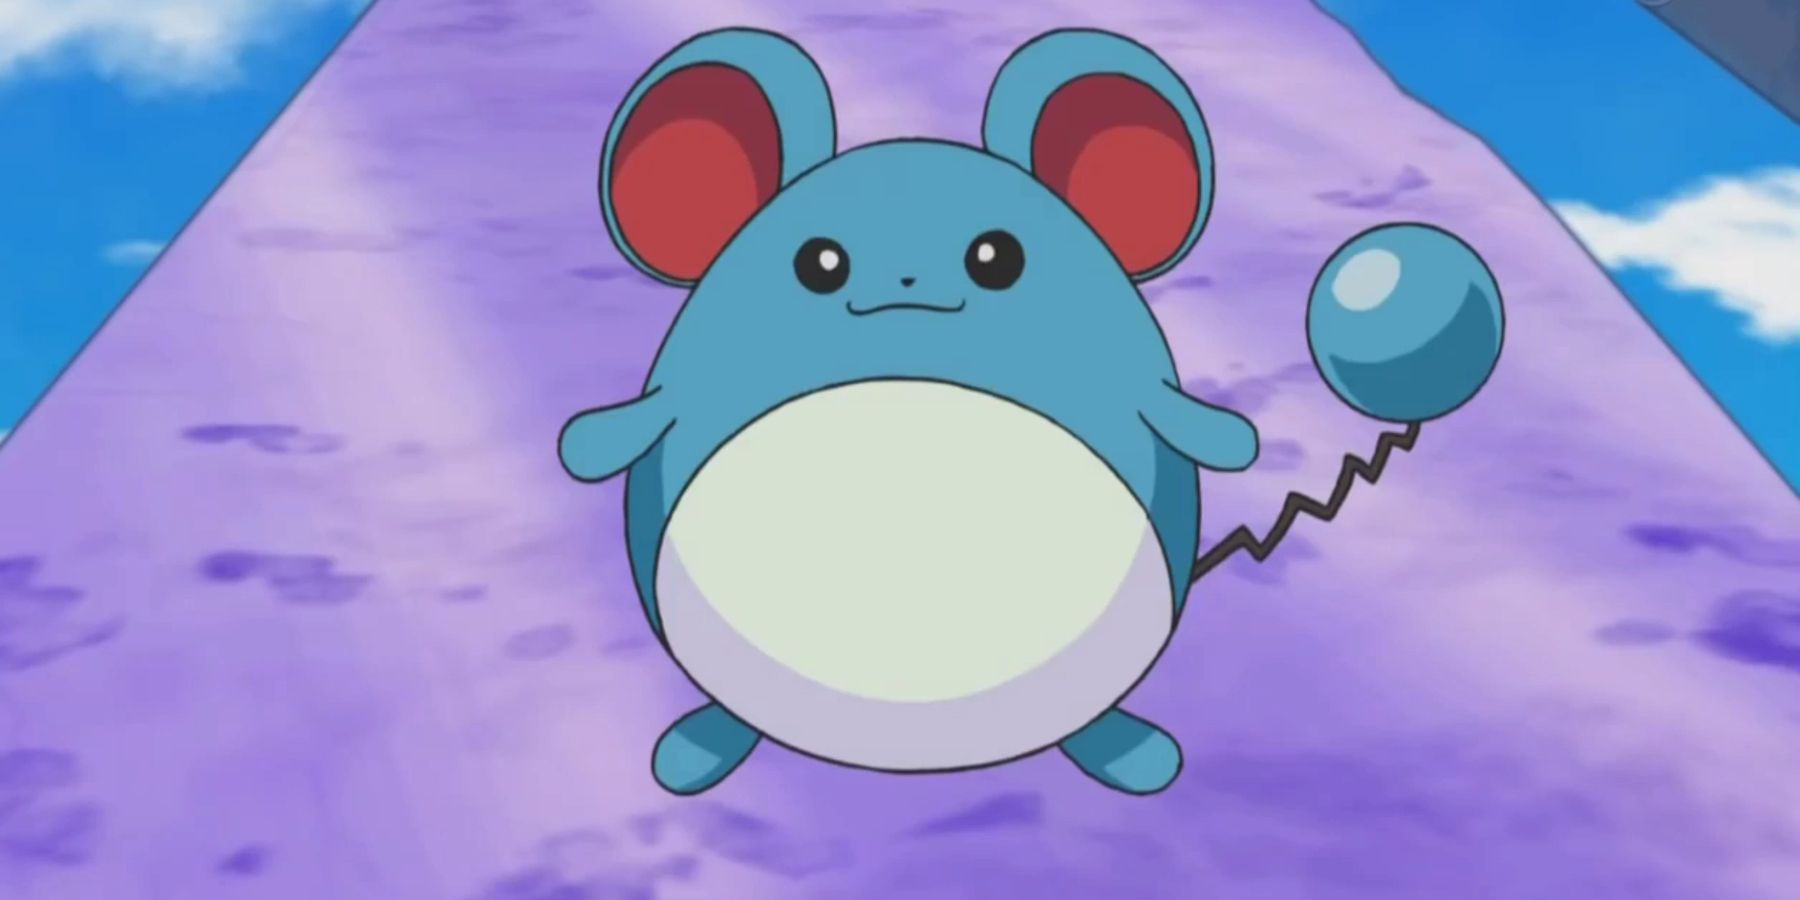 The Pokémon Marill, as seen in the franchise's anime.